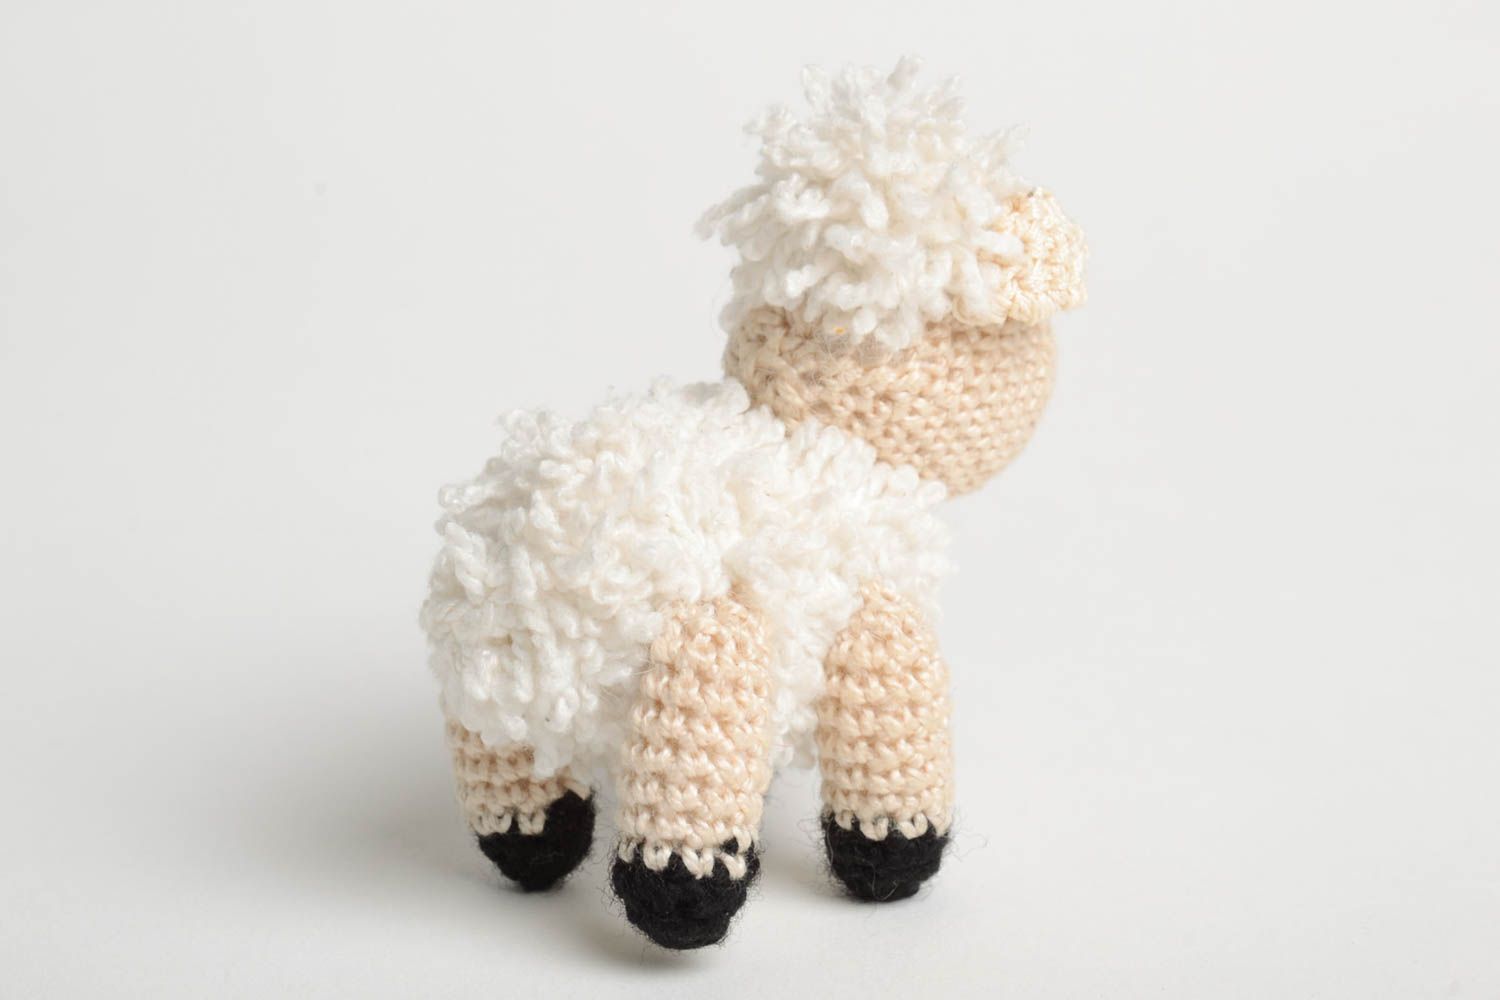 Handmade toy designer toy decor ideas crocheted toy gift for baby animal toy photo 3